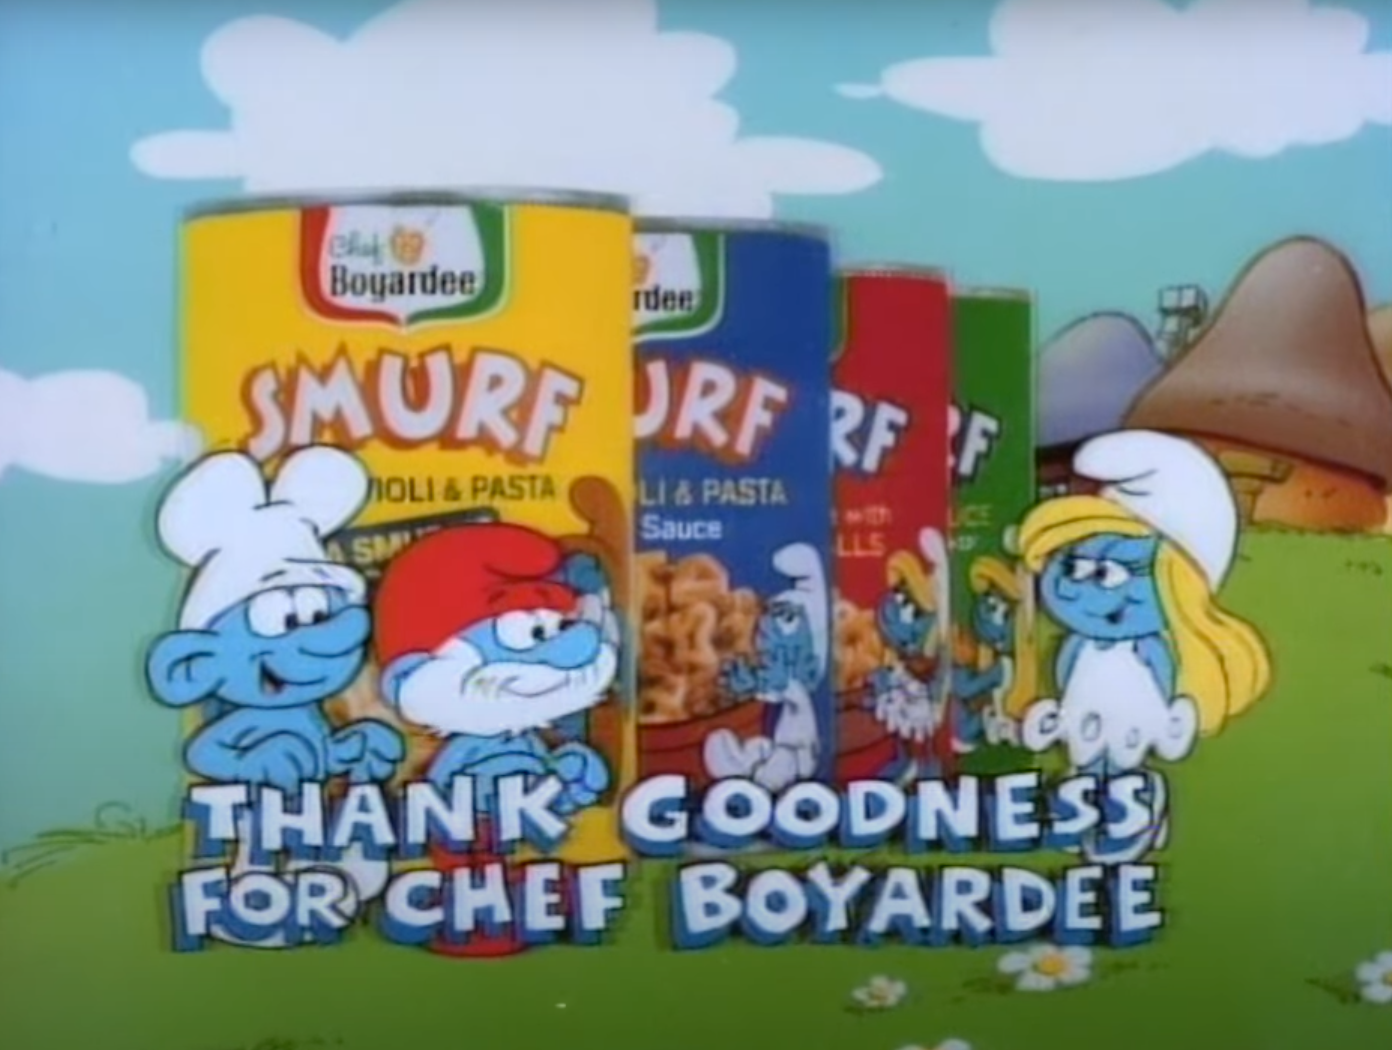 Screen shot of the commercial of the Chef, Papa Smurf, and Smurfette standing in front of Smurf pasta cans